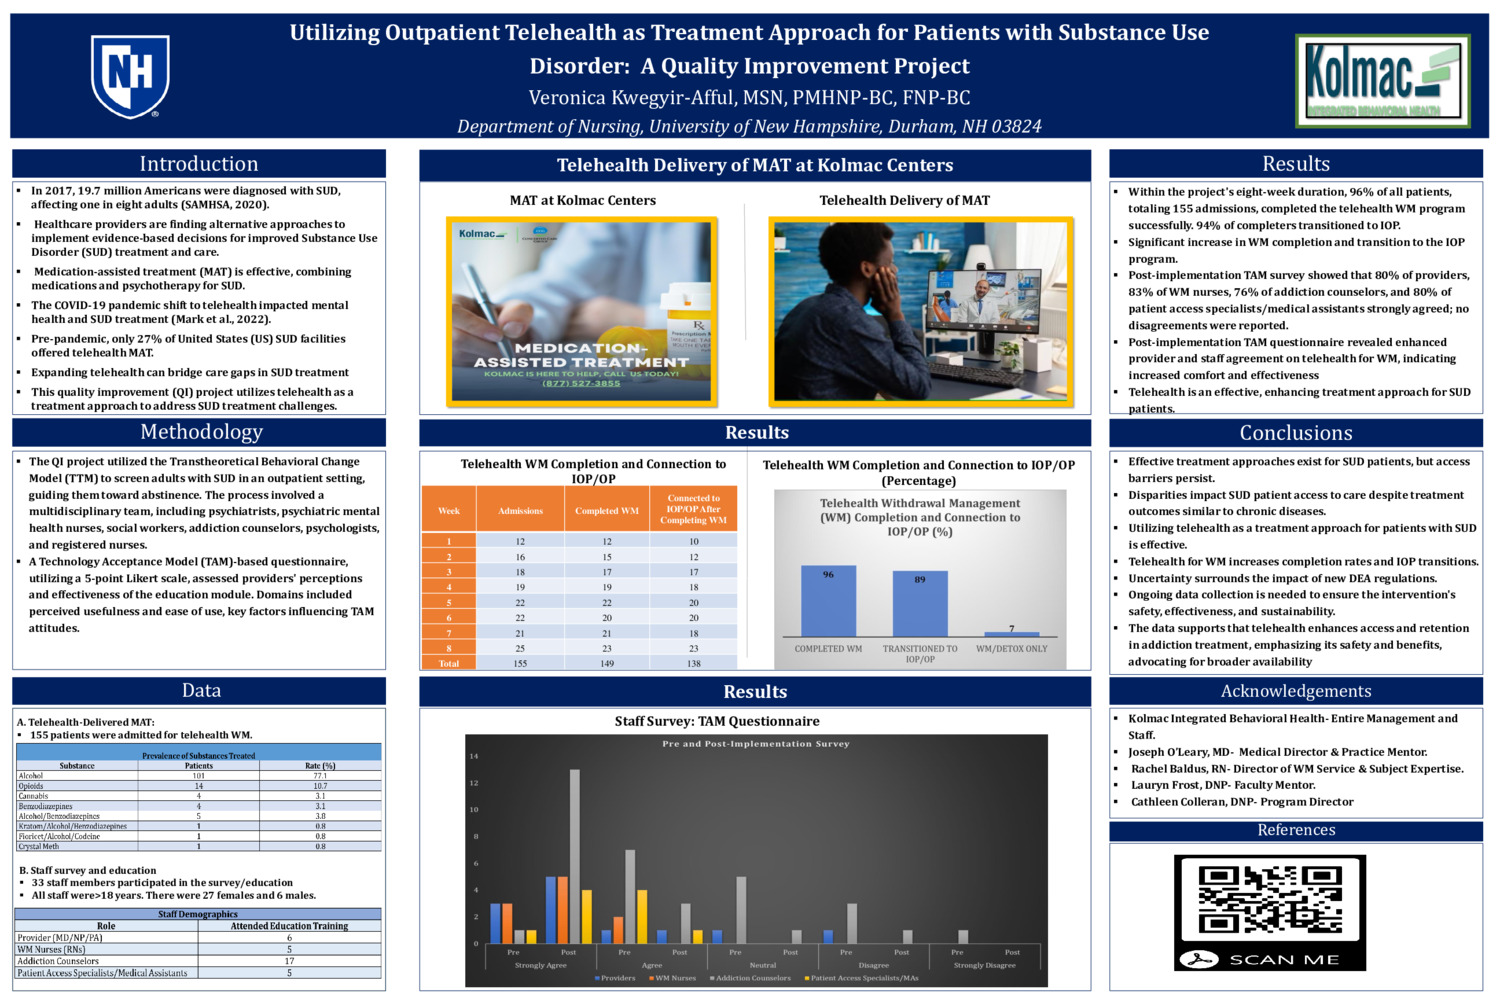 Utilizing Outpatient Telehealth As A Treatment Approach For Patients With Substance Use Disorder:  A Quality Improvement Project by vkwegyirafful